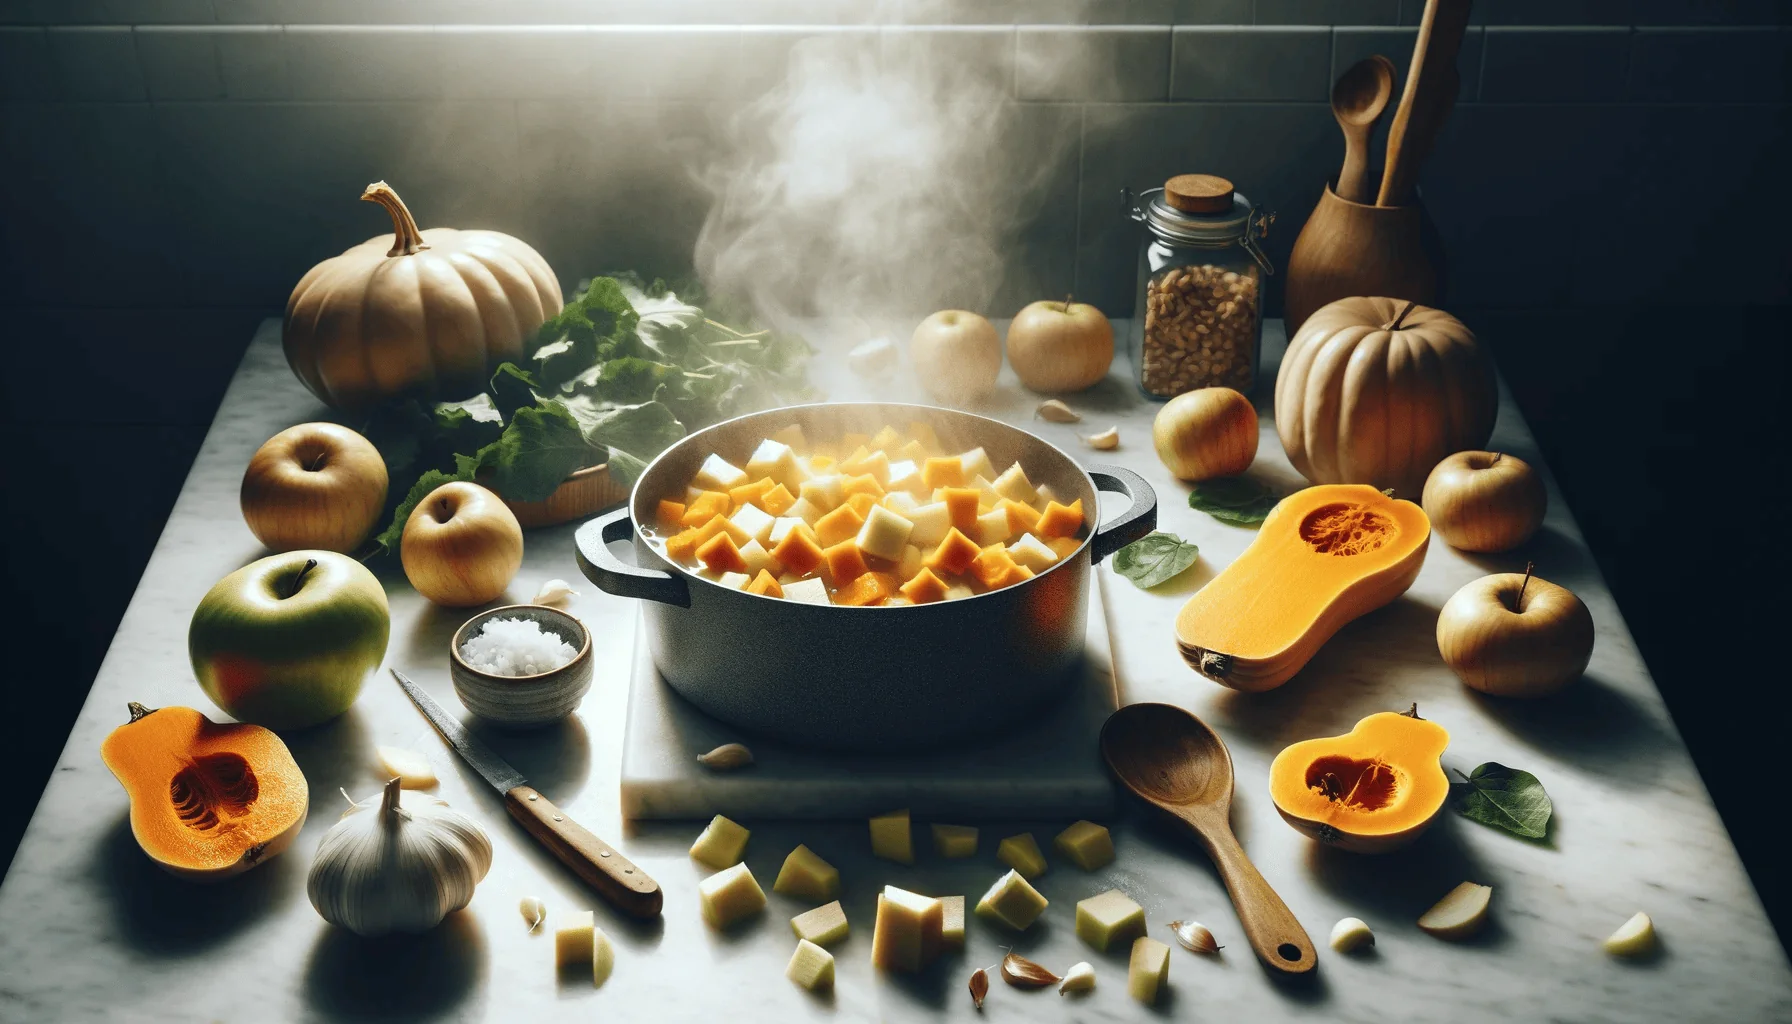 The making of butternut squash and apple soup